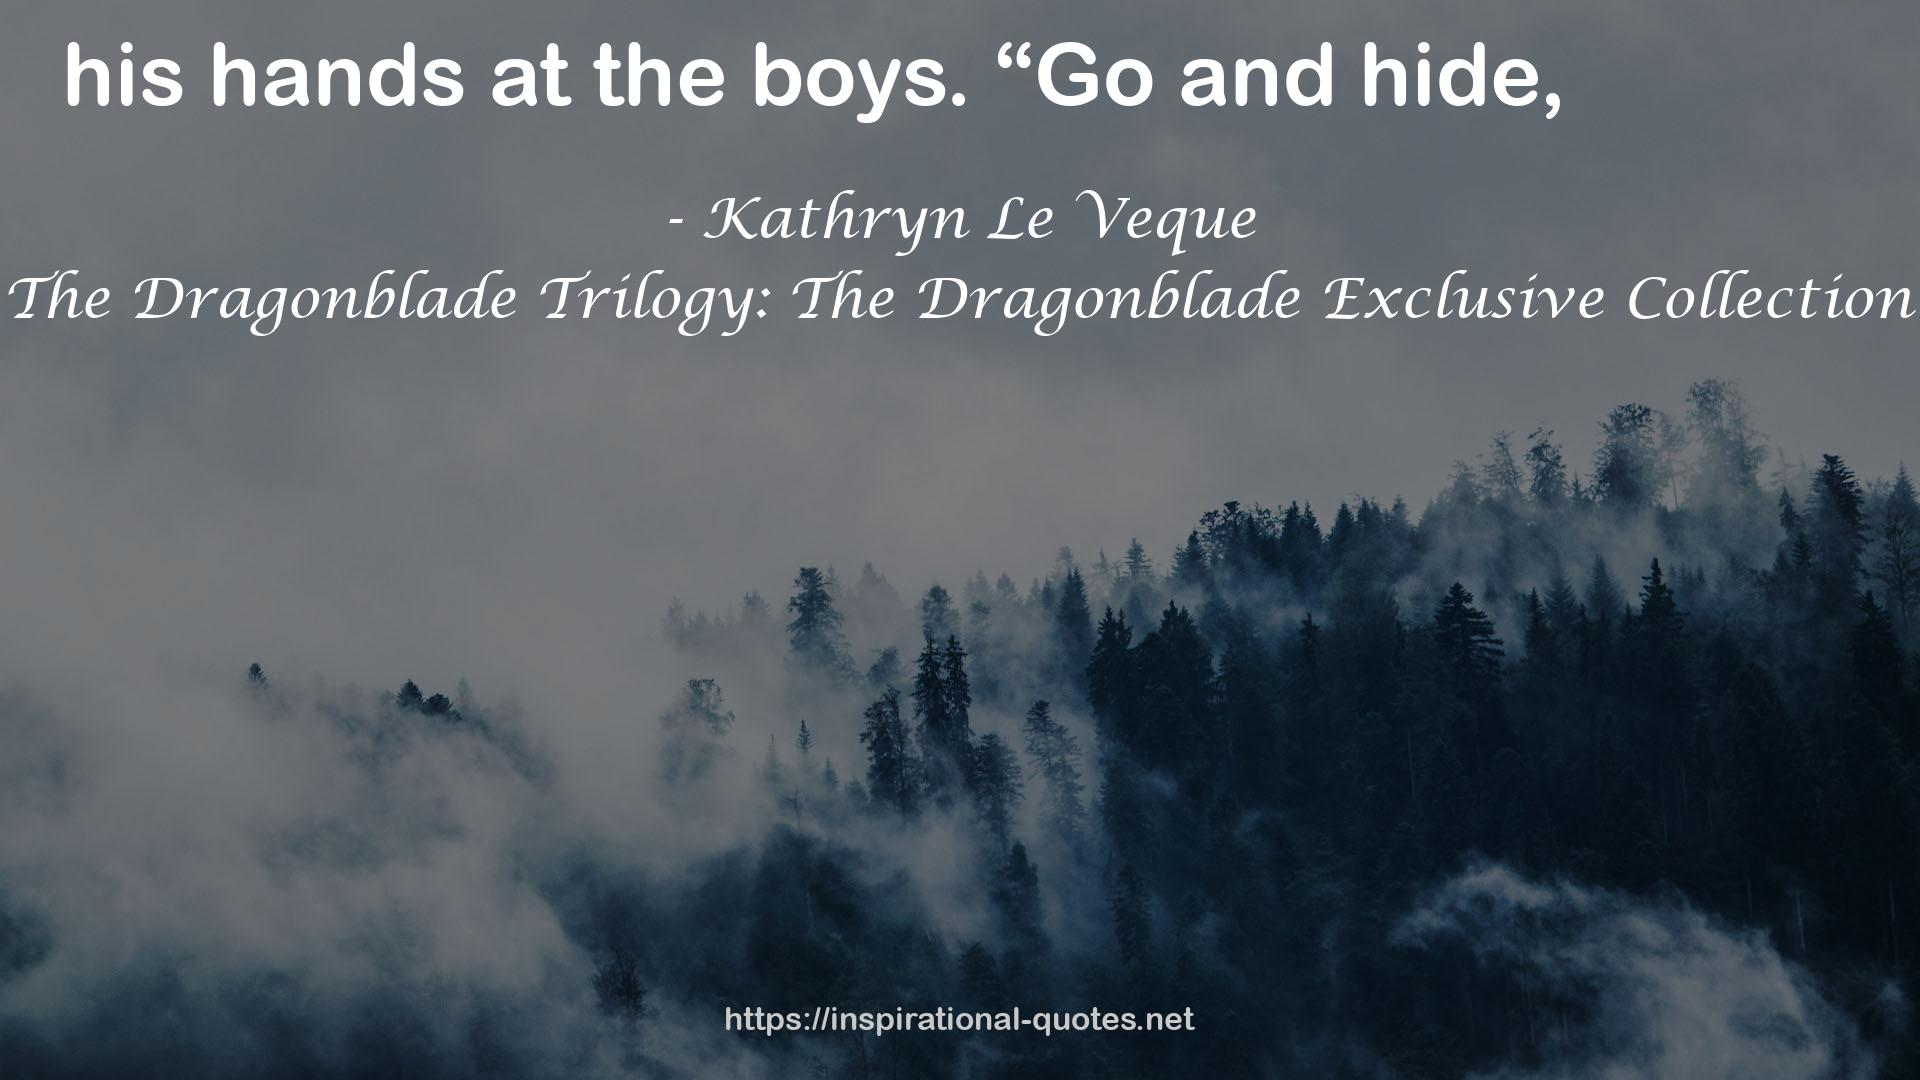 The Dragonblade Trilogy: The Dragonblade Exclusive Collection QUOTES